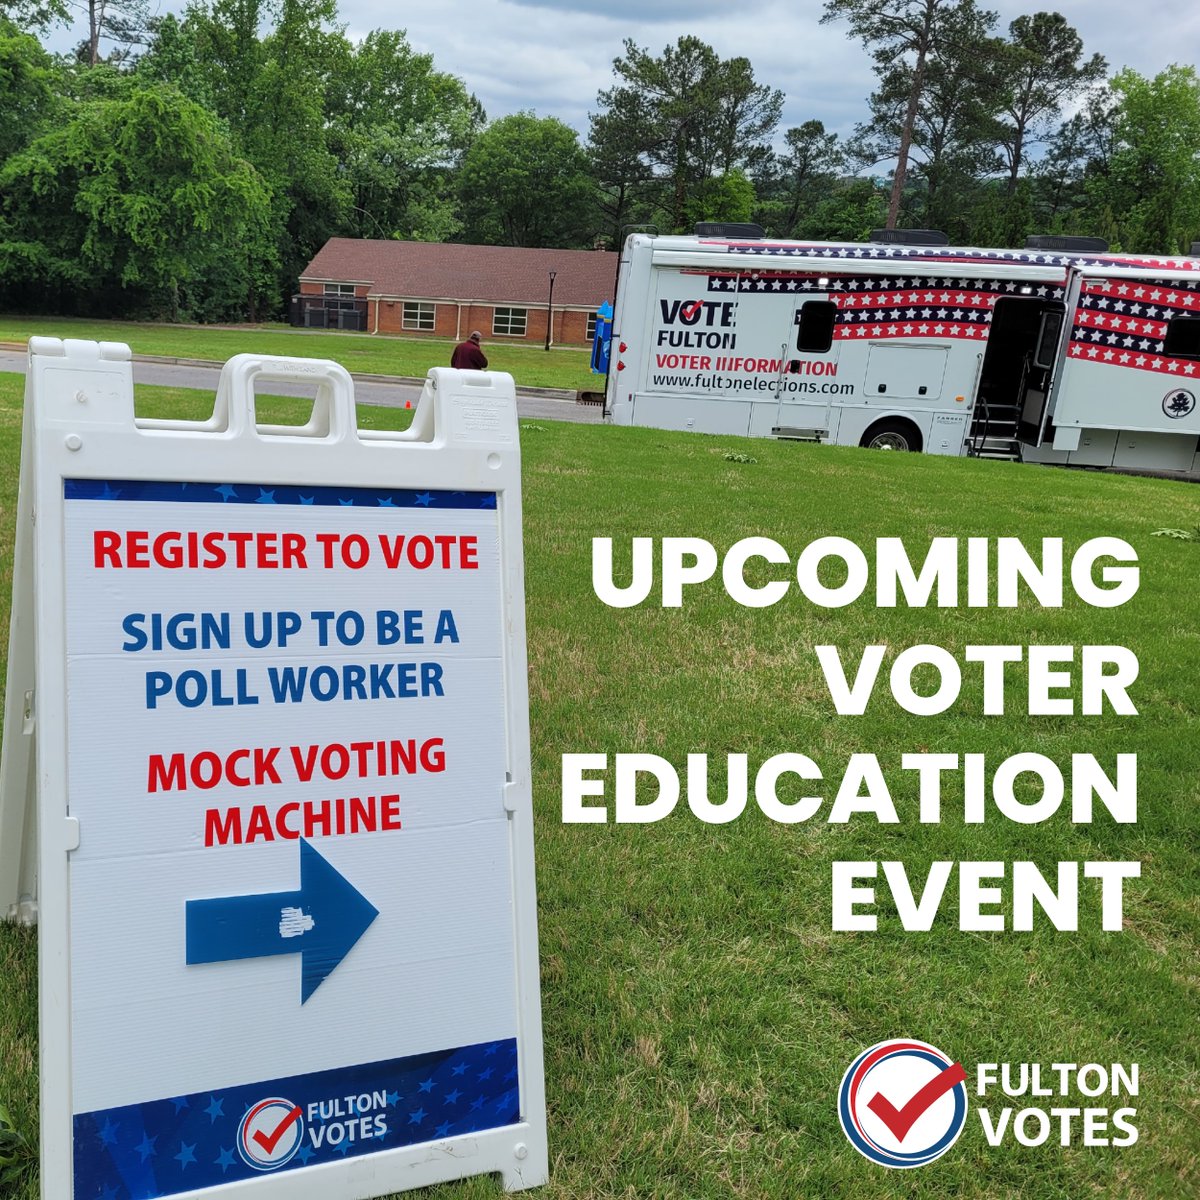 The Voter Education & Outreach team is here to teach you about the elections process in Fulton County! Attend one of the upcoming events to get all the info you need for a smooth voting experience. #FultonVotes #VoterEducation

See a list of events here: fultoncountyga.gov/inside-fulton-…